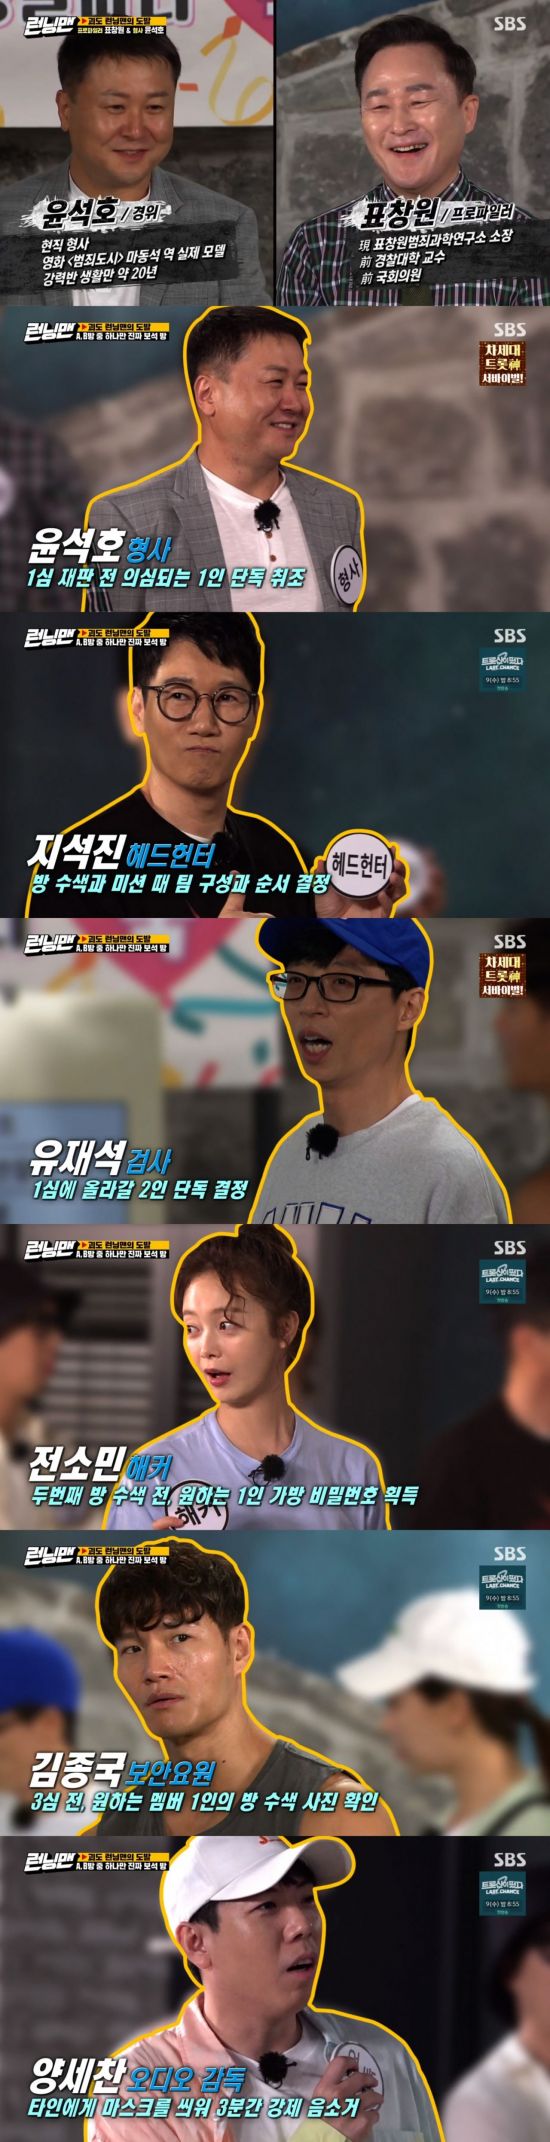 On SBS Running Man broadcasted on the afternoon of the 6th, the citizen team won the victory by arresting Jeon So-min and Haha.On this day, Running Man was conducted as The second special feature of the monster.As a guest, Pyo Chang-wonwonwon, the first domestic profiler, and Yoon Seok-ho Detective, the actual model of crime city of Ma Dong-seok, appeared, and the members admired that the real thing appeared.The second round of the mass Choices first, like the first.Jeon So-min - Hacker, Lee Kwang-soo - Interior specialist, Yang Se-chan - Audio director, Ji Suk-jin - Headhunter, Yoon Seok-ho - Detective, Haha - Photographer, Kim Jong-kook - Security agent, Yoo Jae-Suk - Prosecutor, Song Ji-hyo - Judge, Pyo Chang-wonwon Won - is designated as Profiler.The second round of the goblin had to arrest two goblins who were not invited to the joint birthday of Jaeseok-Haha-Jihyo; the goblins were the winner if they stole more than 100 jewellery.Pyo Chang-wonwonwon and Yoon Seok-ho were actually monitoring all the members coming in.Both pointed out that Jeon So-min came too early and revealed that they were most suspected of the gangster.In the first room Caught in the Web time, two members paired up and entered the A and B rooms.After Caught in the Web, Pyo Chang-wonwonwon said, Song Ji-hyo and Jeon So-min made scissors rocks and Jeon So-min won, and Jeon So-min went into room B.Lee Kwang-soo and Ji Suk-jin are all trying to get into room A, a little bit of room A seems to be quite important, he said.Yoon Seok-ho said, I originally visited the residential area a few days before the thieves robbed during the holiday.I start work after looking at whether there is CCTV, what is around, whether the house is on or off. At this time, Lee Kwang-soo said a few words, and the audio director Yang Se-chan, who has the authority to stop the members mouths, laughed with a mask on Lee Kwang-soos mouth, saying, I will stop this brothers mouth.Yoo Jae-Suk said: One of the weirdest things was that I came the fourth time and the prosecutor and the judge were not out.So one of the three people who came before me could be a goblin. Jeon So-min - Haha - Yang Se-chan was put on the goblin dragon line.He was then given a mission to draw and arrest a sketch.The members paired up with two members, one of whom had to find a sketch according to the crews explanation, and the other one had to find the main character of the sketch among the staff and members in the studio.The first and second figures were among the staff; the Yoo Jae-Suk - Yang Se-chan, Pyo Chang-wonwonwon - Kim Jong-kook teams were the correct answer, respectively.The third was a slightly rotten, amber-like face, a slightly thin head to touch on the shoulder, a little bigger in the eyes, a little higher in the nose, and a little cremation.In this explanation, Yoon Seok-ho Detective pointed out Lee Kwang-soo and was the right answer.Ji Suk-jin - Lee Kwang-soo, Jeon So-min - Song Ji-hyo, who became fifth and fourth in the game, was released.And the production team revealed that there were zero jewels stolen by Gyodo in the Web in the first episode, and Pyo Chang-wonwonwon, who saw the photo, said, The only strange thing is the madman.All the bags are lying down, but they are all built only in Lee Kwang-soos photographs. At this end, Yoon Seok-ho said, I set it up.I tried to feel the weight of the bag, he said, raising suspicions.Yoon Seok-ho, who has the authority to question one person, pointed to Yang Se-chan.I dont understand, but today I have assigned the role sharing to the cast. If it is a gangdo, it is my own leisure. It is the leisure of criminals, said Yoon Seok-ho, Detective.Now it was time for prosecutor Yoo Jae-Suk, who could put a suspected figure on trial for a gangster.Yoo Jae-Suk Choices Haha and Jeon So-minThe crew was able to tell only that there was a goblin/no one among the members who were on the trial at this time, but the production team informed Haha and Jeon So-min that there is goblin among them.The second Caught in the Web followed, and the crew said the gangsters stole 100 jewels, when Yoon Detective said Pyo Chang-wonwonwon was suspicious.Members were able to put the most suspicious person on the bench by voting, and Jeon So-min, who won the most votes, was again on the bench.The production team confirmed, The mass is right.In the third - final Caught in the Web, the crew informed them that the gobs stole a total of 352 jewels.At the time of the photo release, Kim Jong-kook commented, You can see how you moved the jewels by seeing the people. The members began to analyze the photos of the people.While several others were nominated for the remaining one, Haha finally came to the trial after the persistent Murder, She Wrote of Yoo Jae-Suk and Kim Jong-kook.The production team said Haha was right about the attack. The citizens who succeeded in arresting all two of them won the victory.SBS entertainment program Running Man is broadcast every Sunday at 5 pm